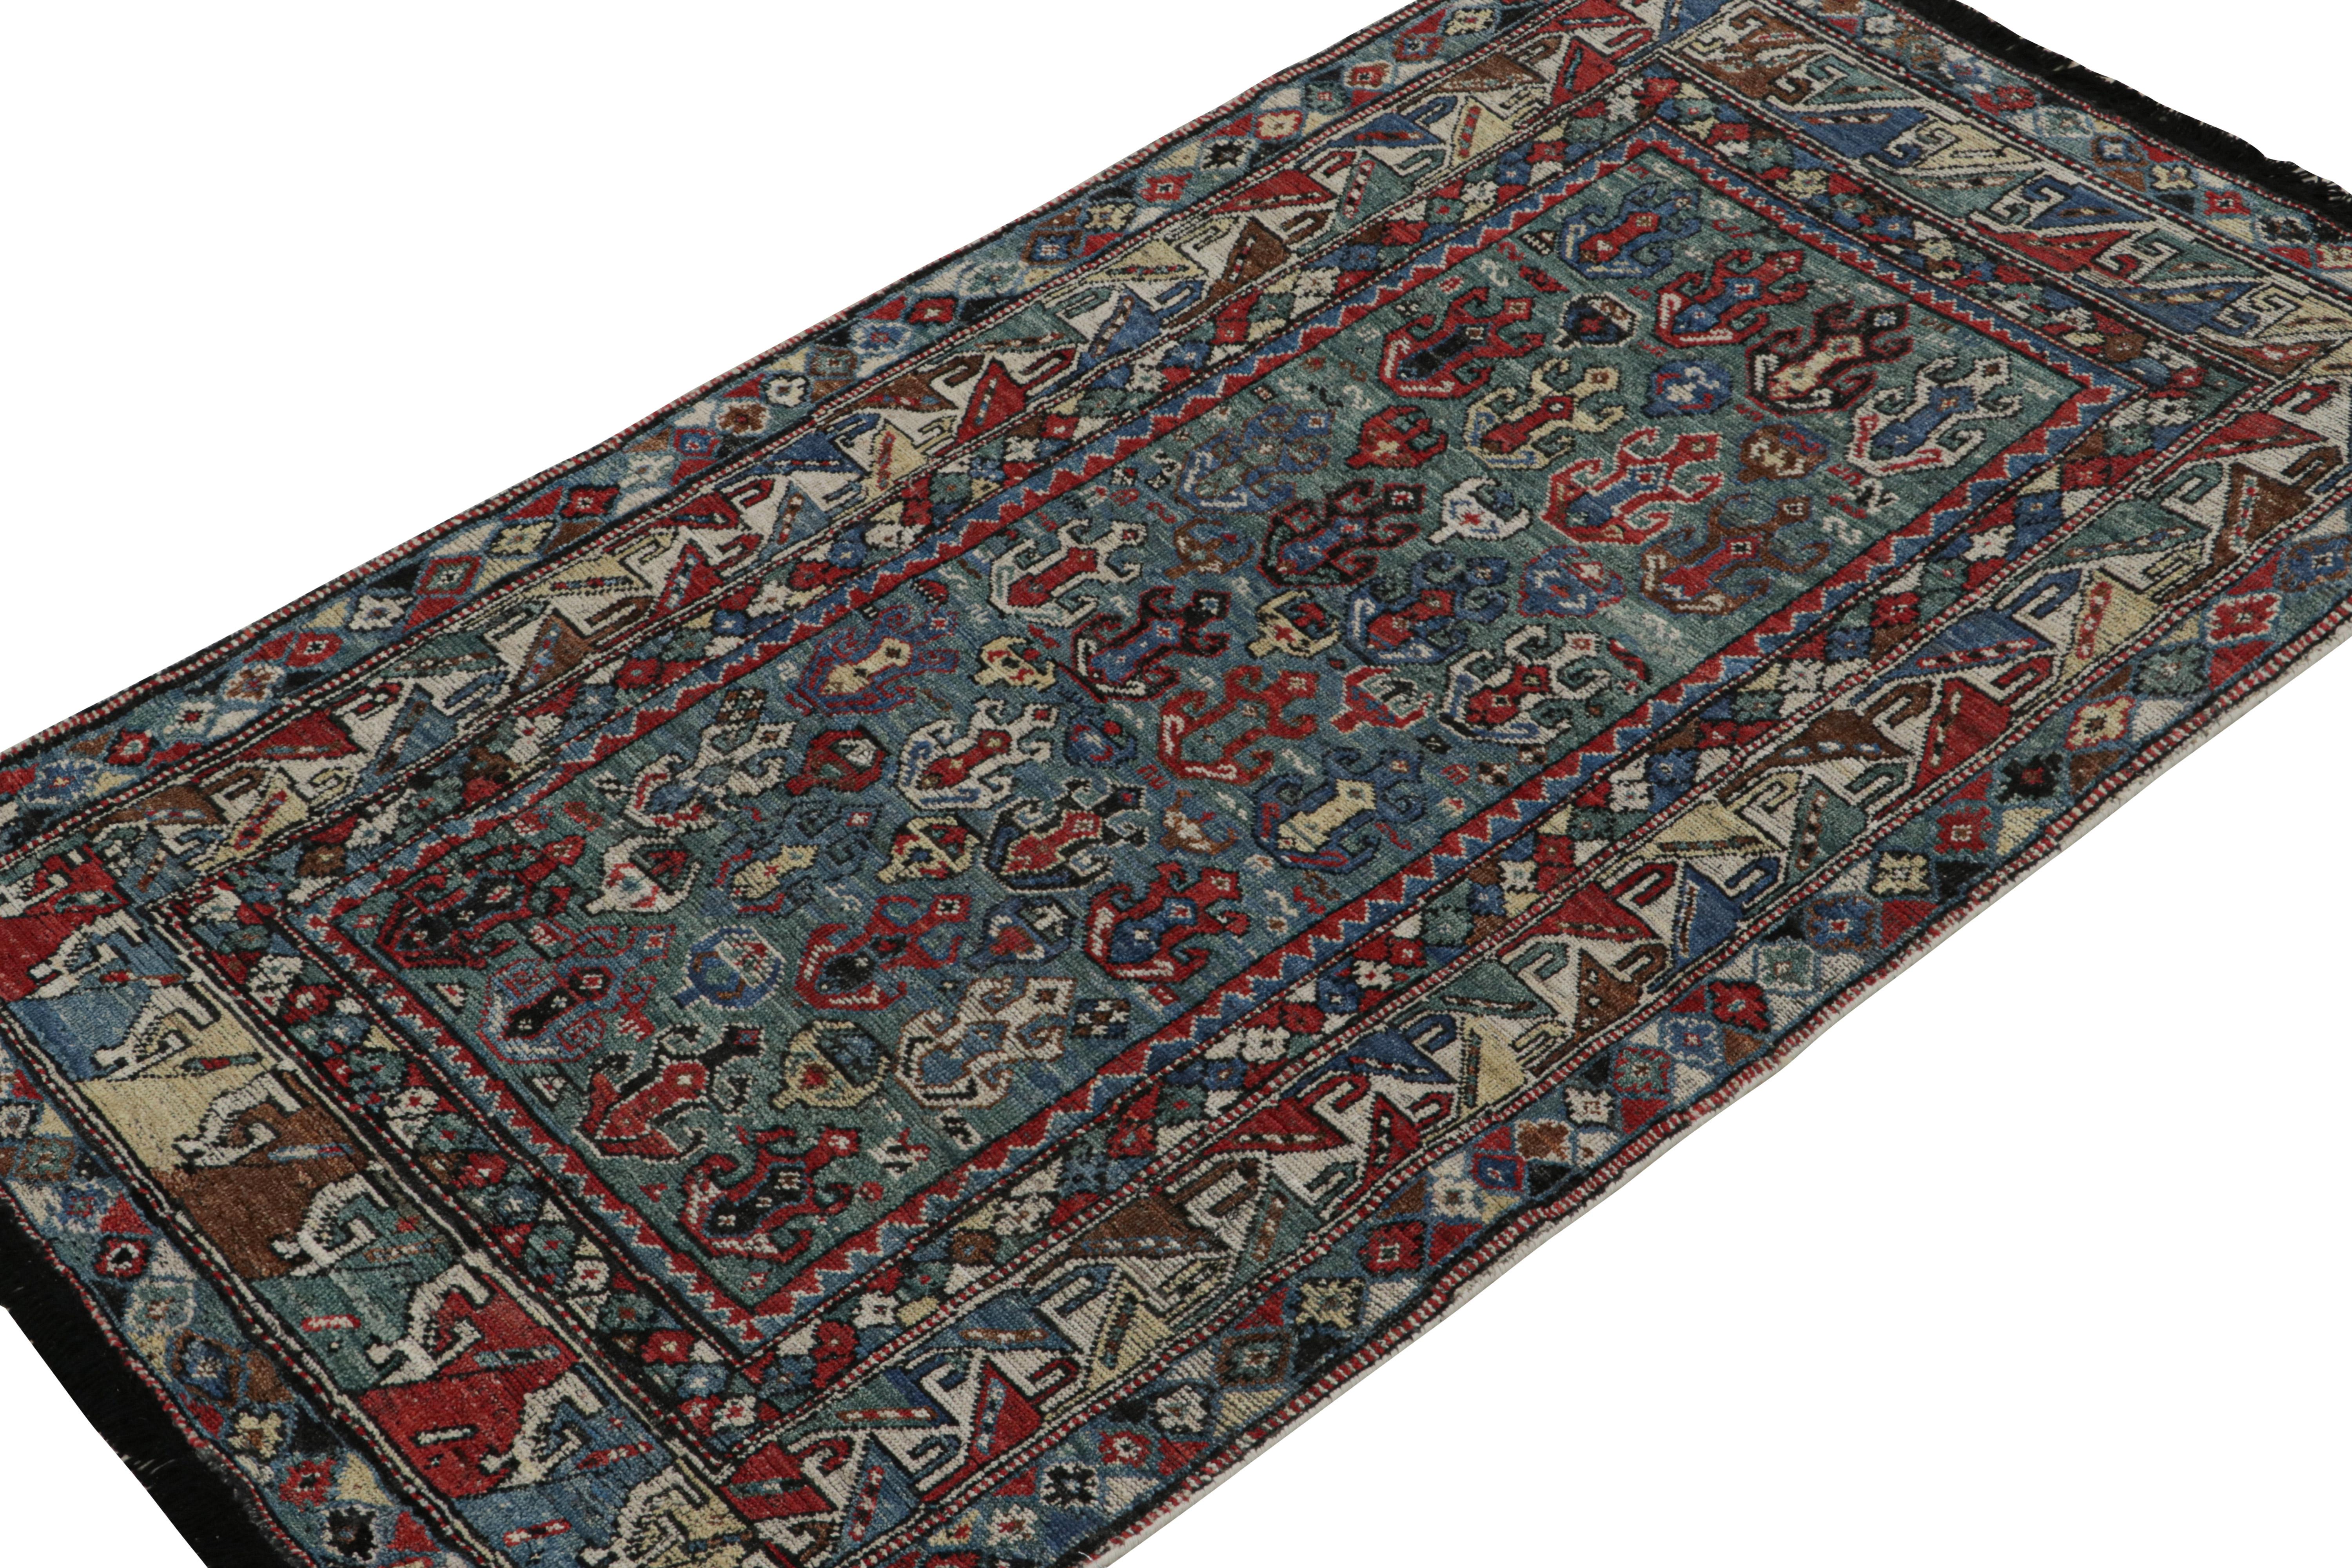 This 4x7 rug is a grand new entry to Rug & Kilim’s Burano collection. Hand-knotted in wool.

Further on the Design: 

Inspired by antique tribal rugs, this rug revels in green, blue & red with defined movement and traditional sensibility. Keen eyes